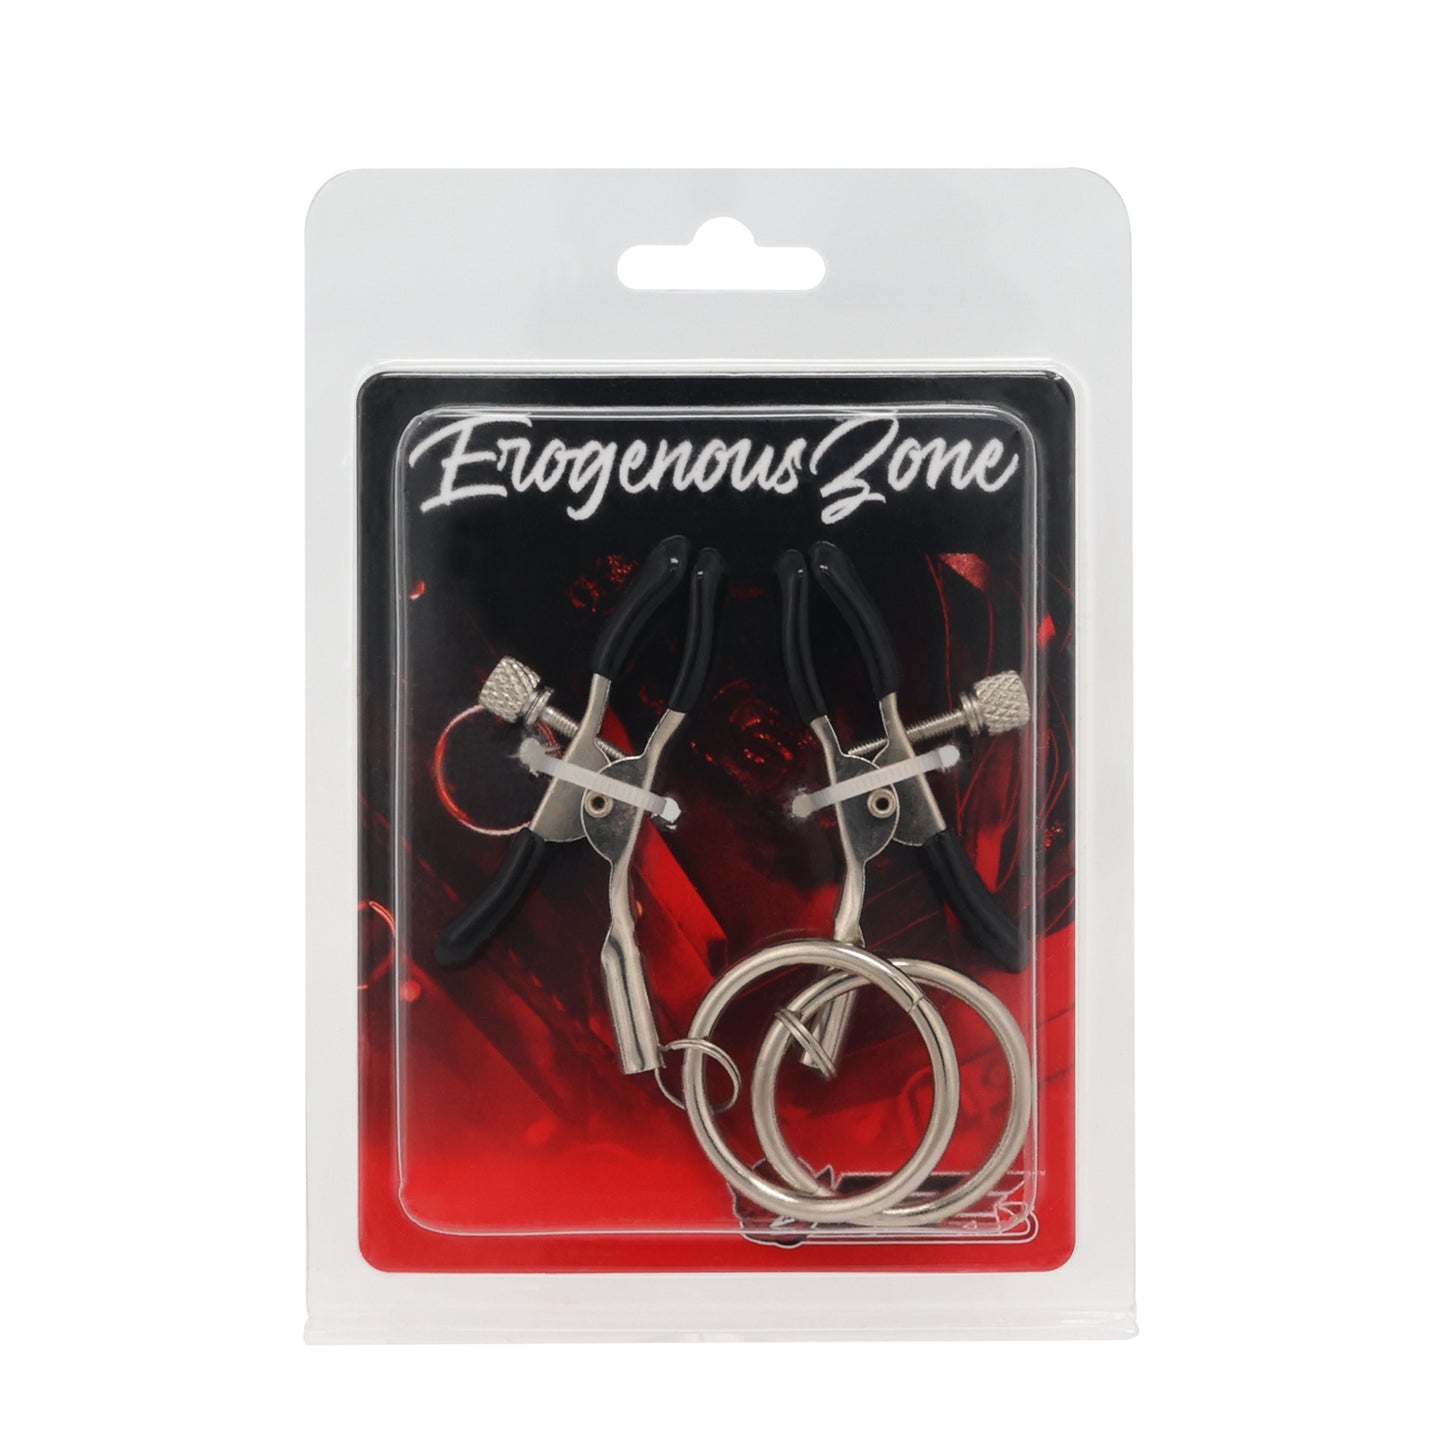 EROGENOUS ZONE ADJUSTABLE NIPPLE CLAMPS W/ LARGE RING